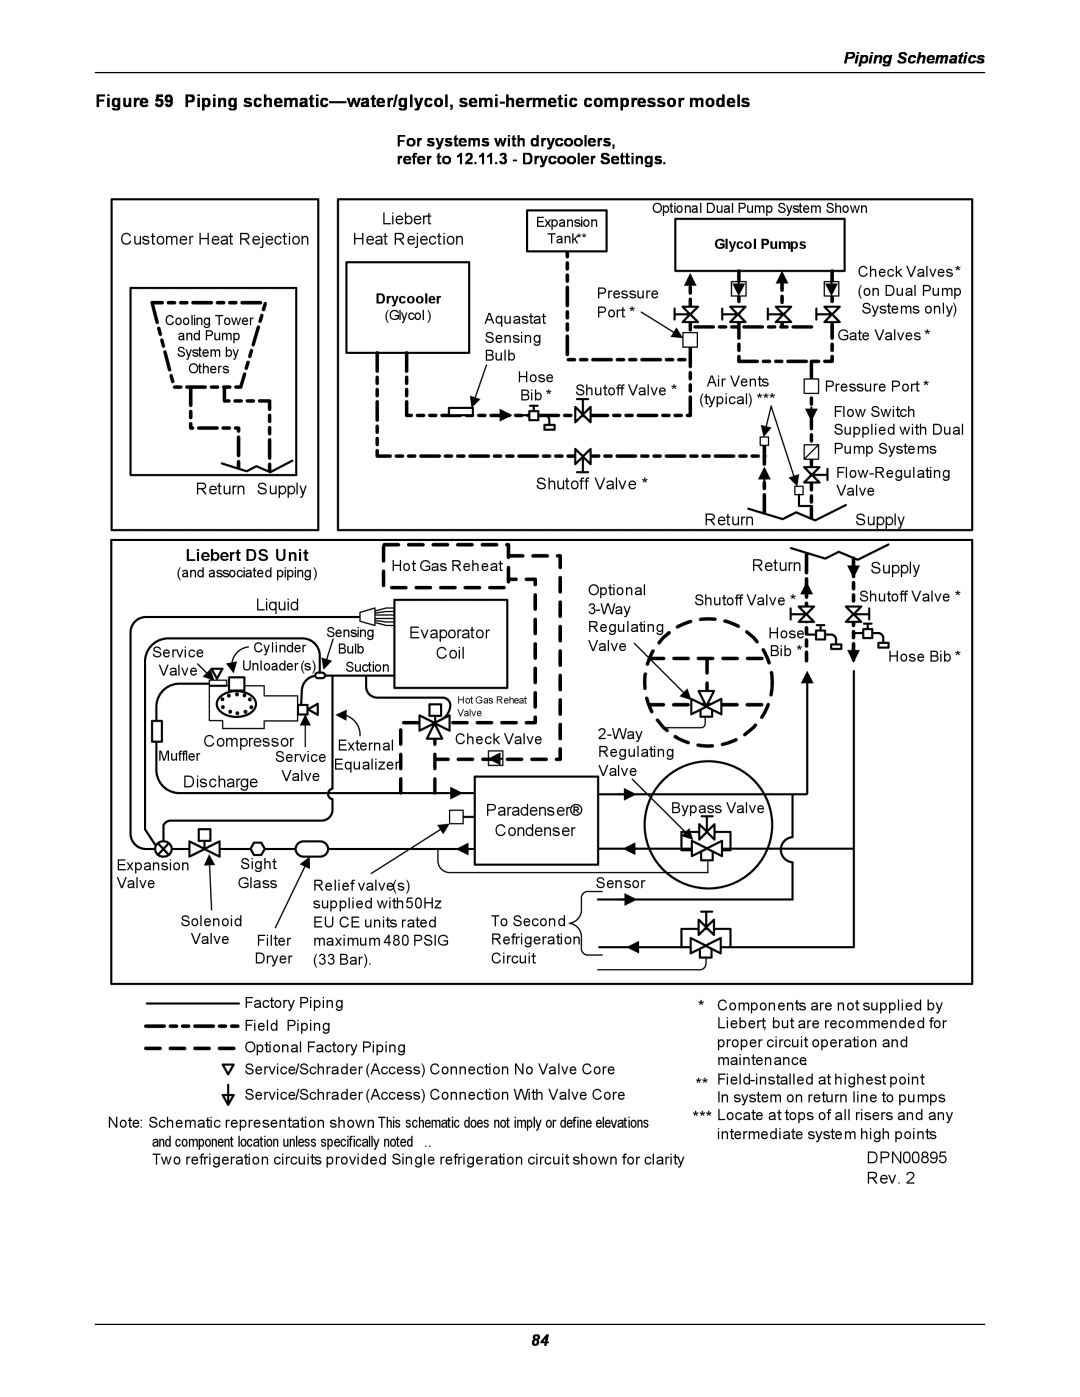 Liebert Piping schematic-water/glycol, semi-hermetic compressor models, For systems with drycoolers, Liebert DS Unit 